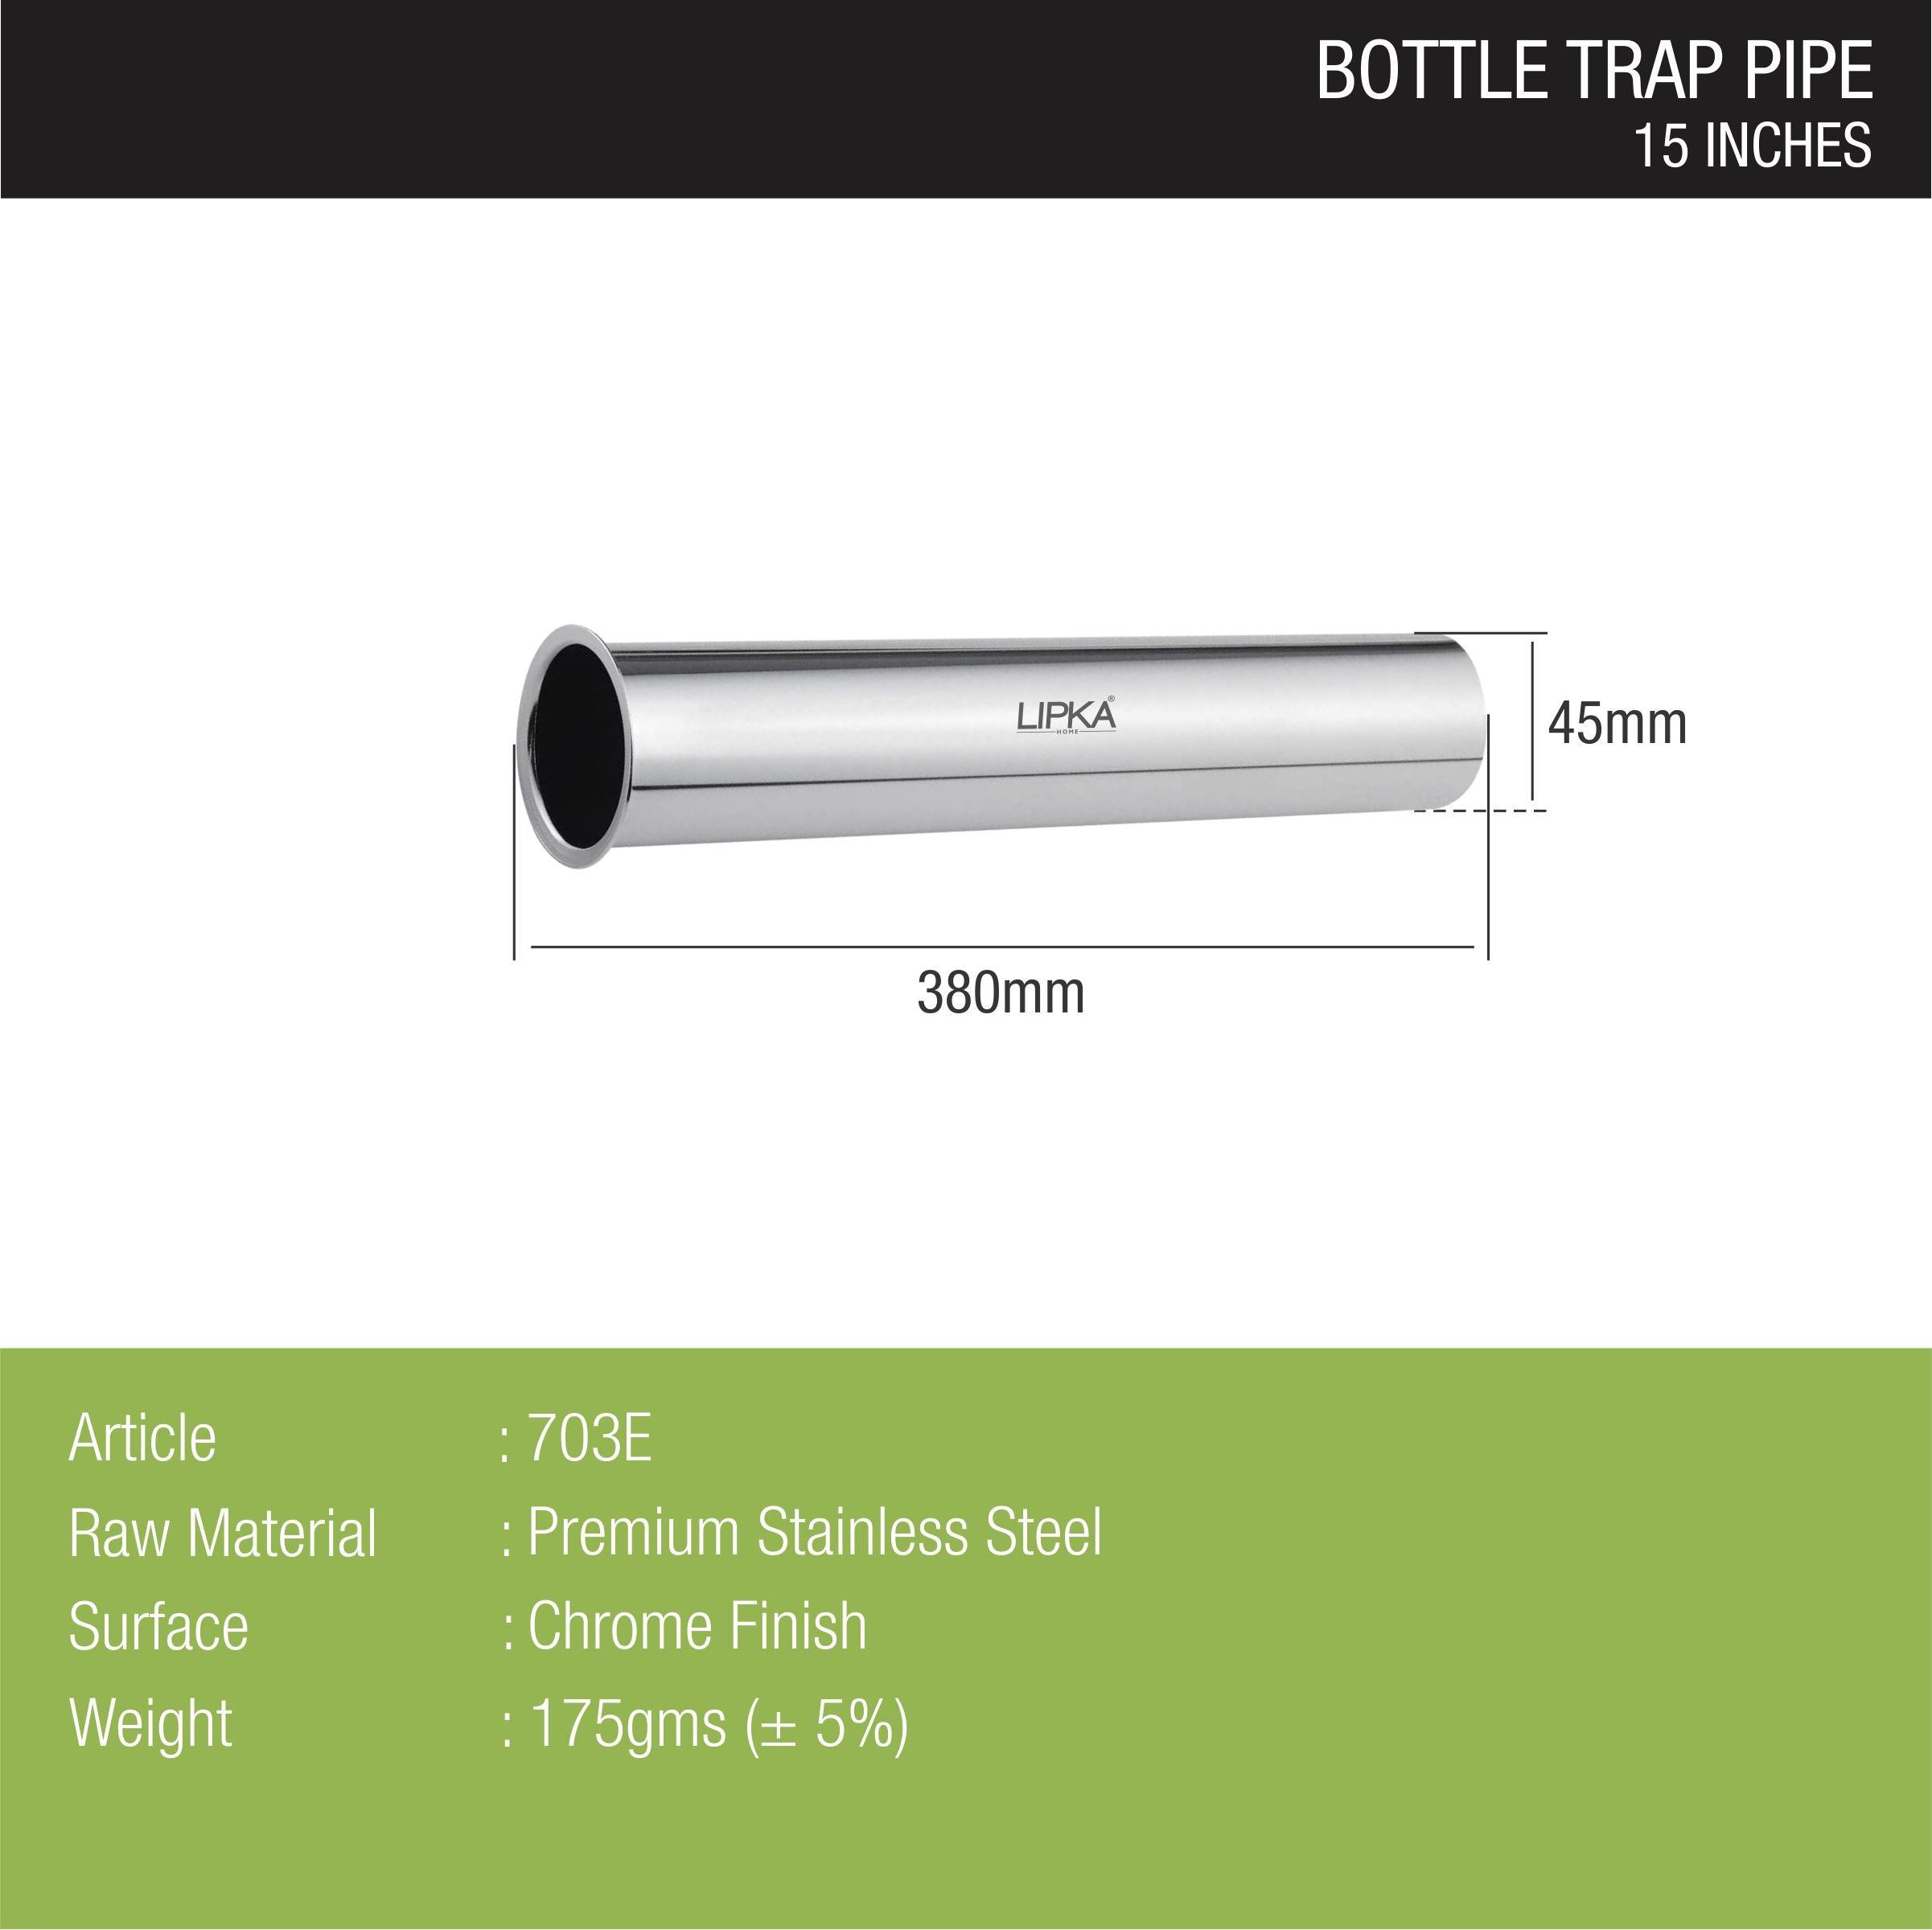 Bottle Trap Stainless Steel Pipe (15 inches) sizes and dimensions